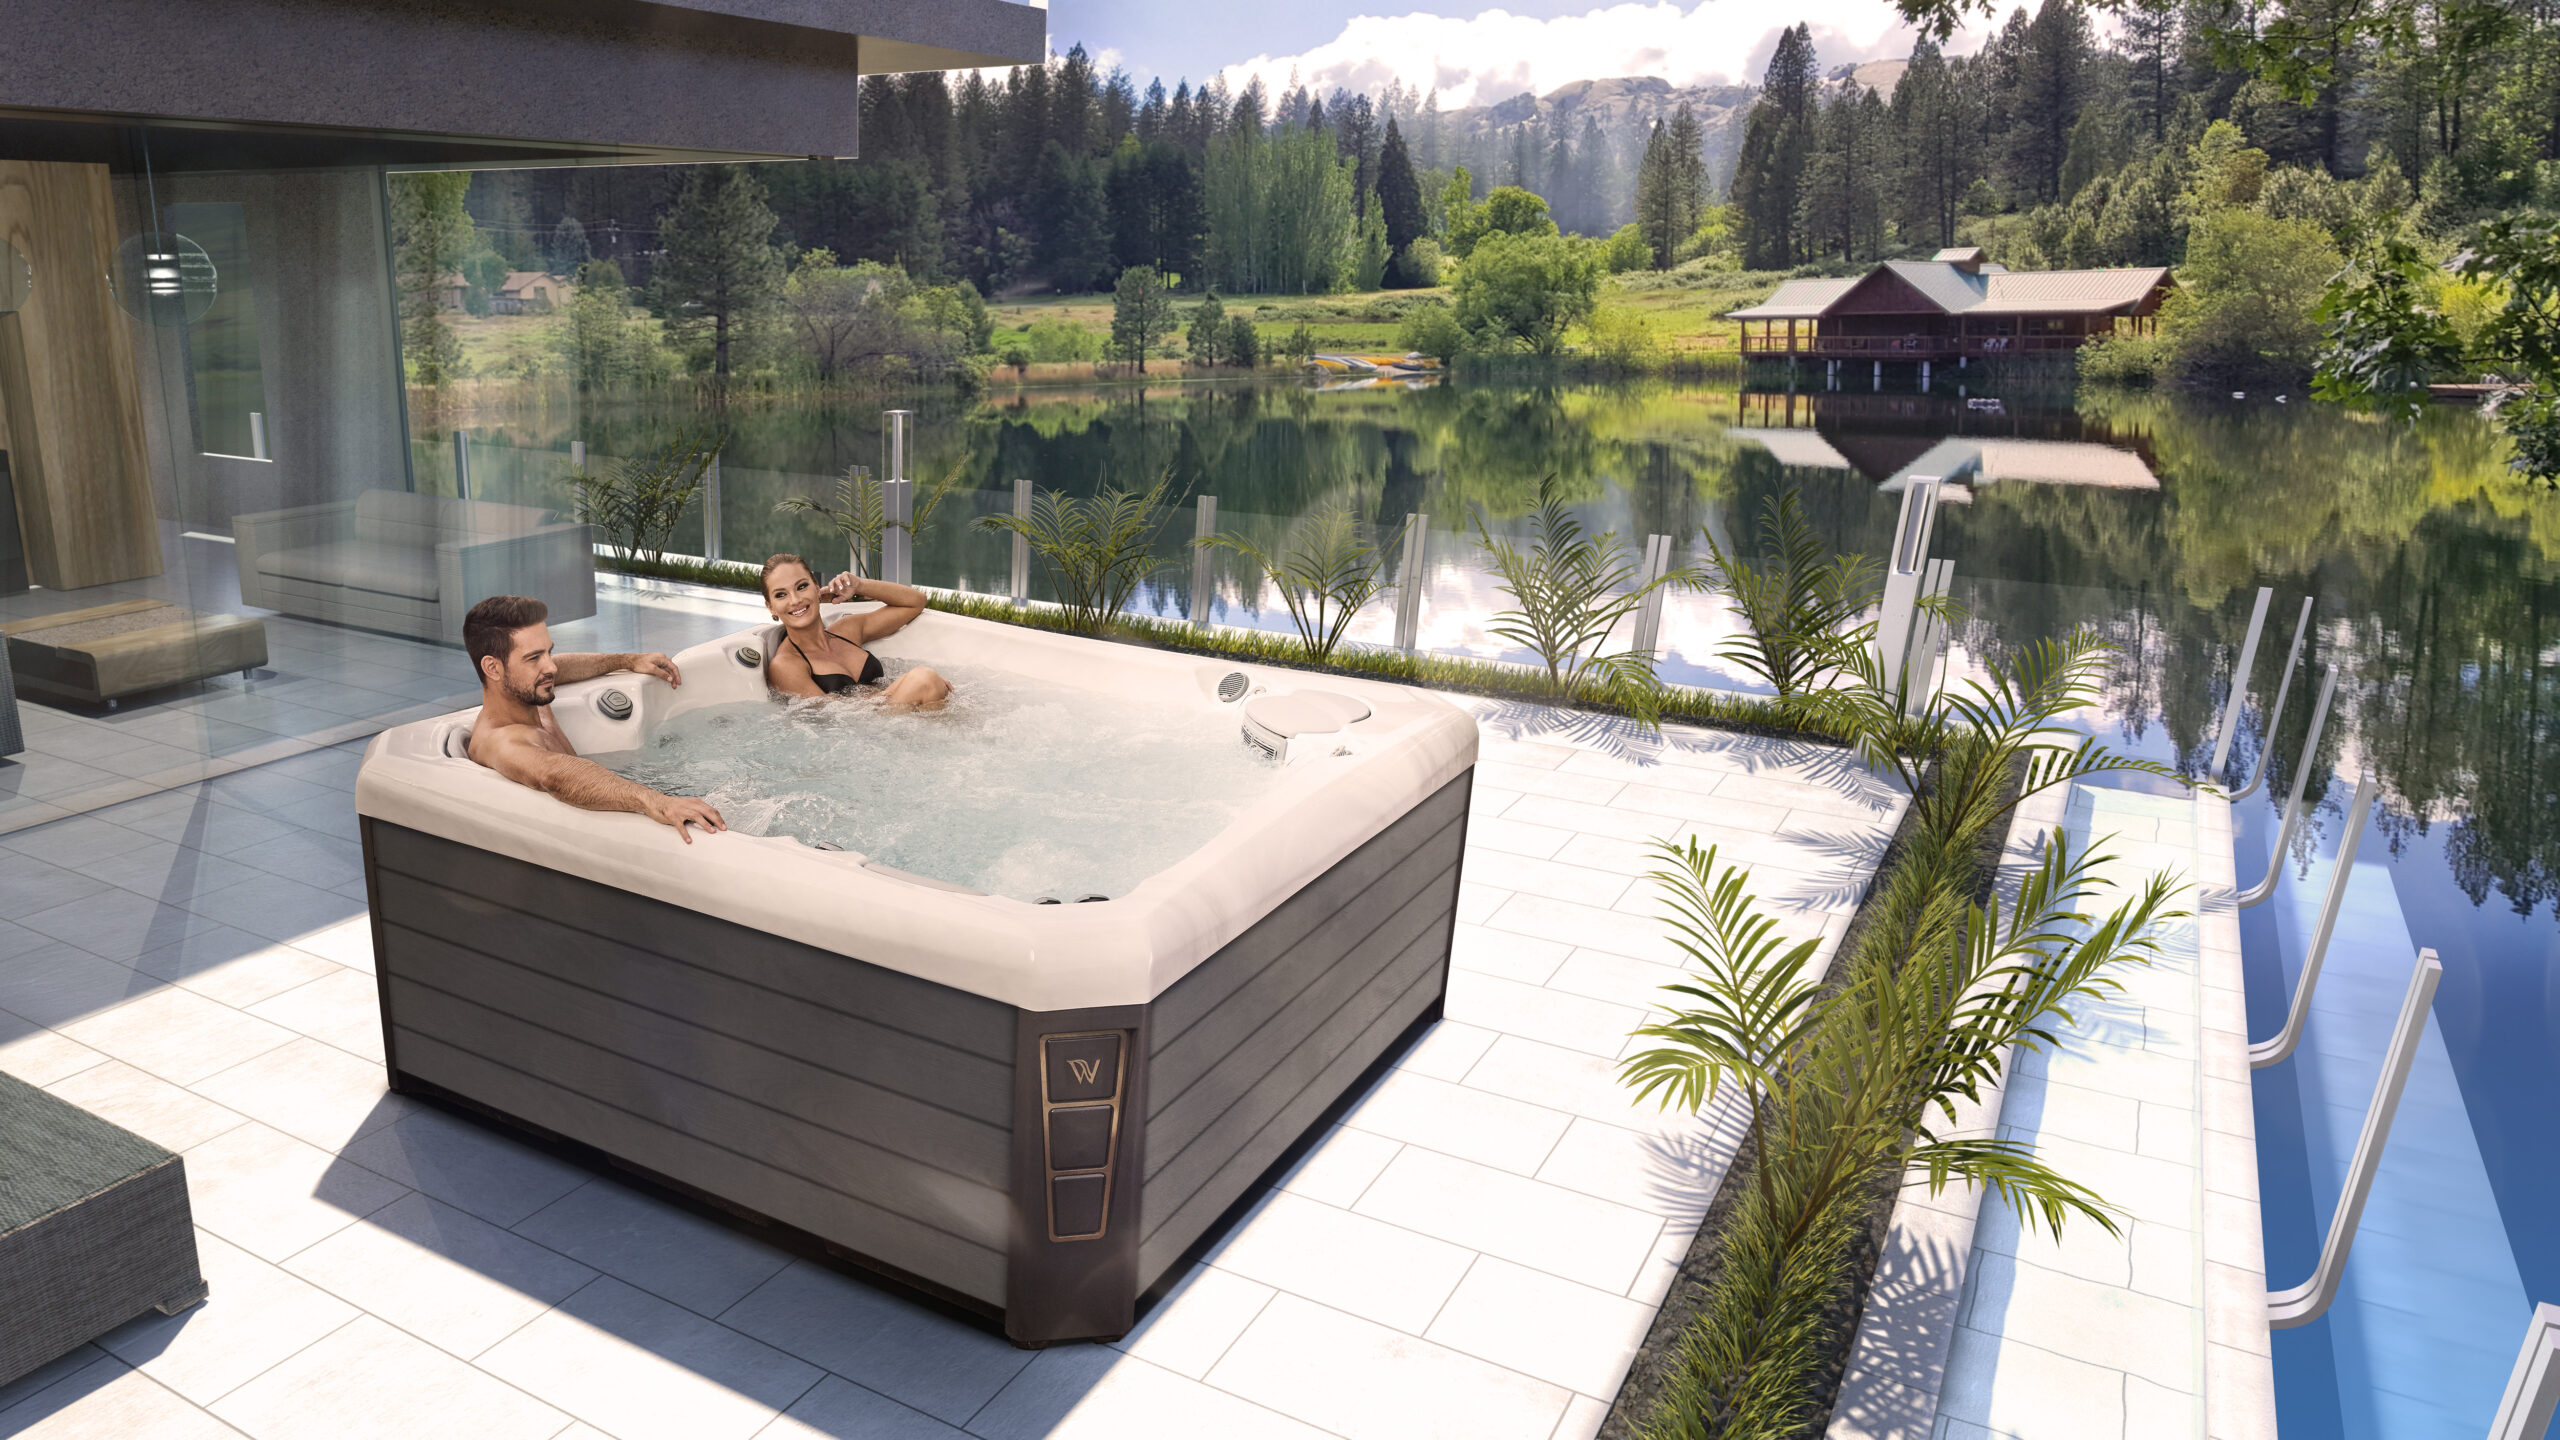 A couple takes time to relax in their Wellis spa that situated on a modern deck with plants overlooking a lake.